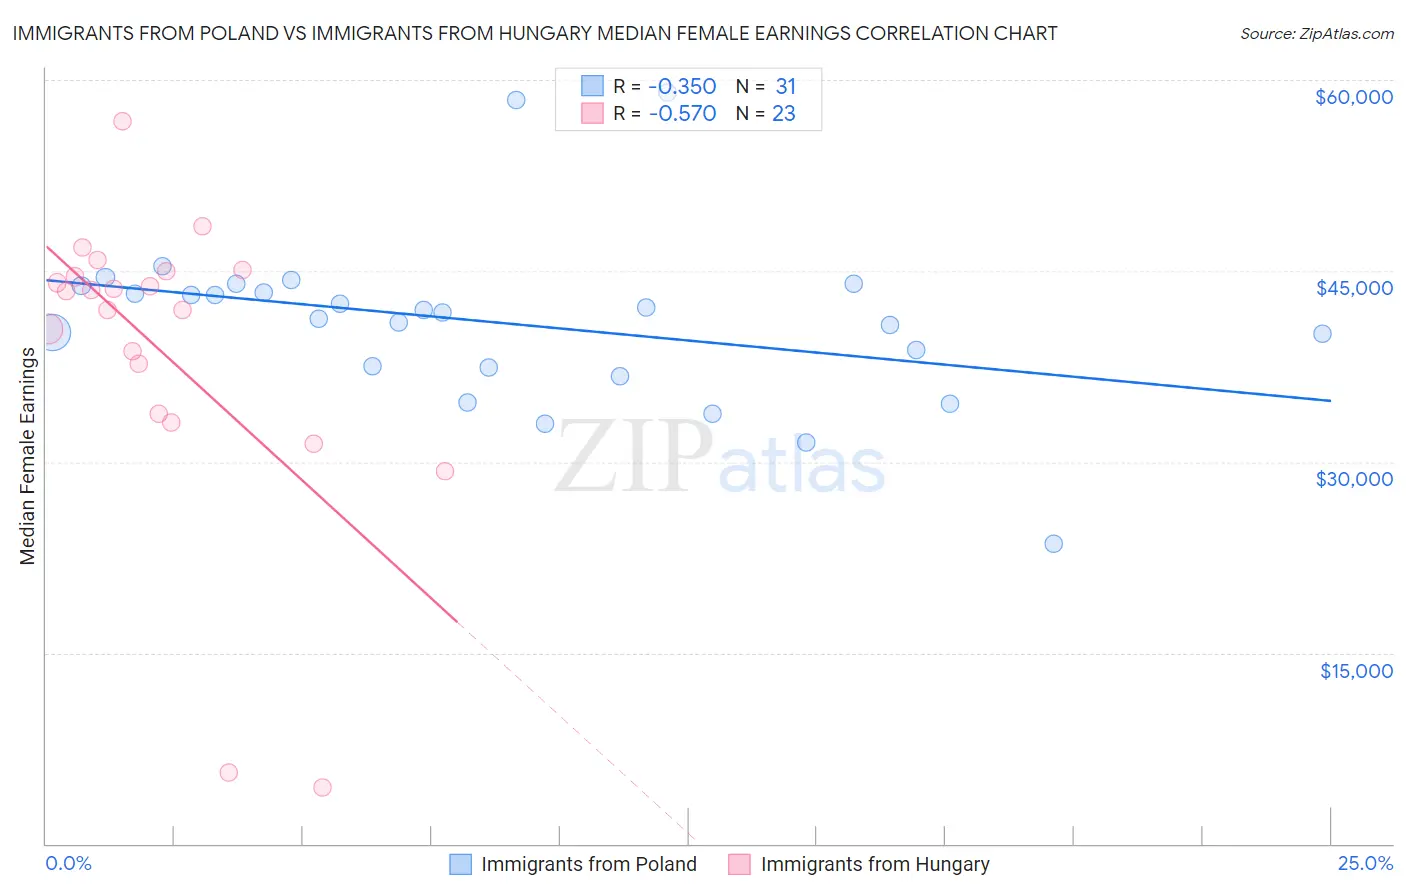 Immigrants from Poland vs Immigrants from Hungary Median Female Earnings